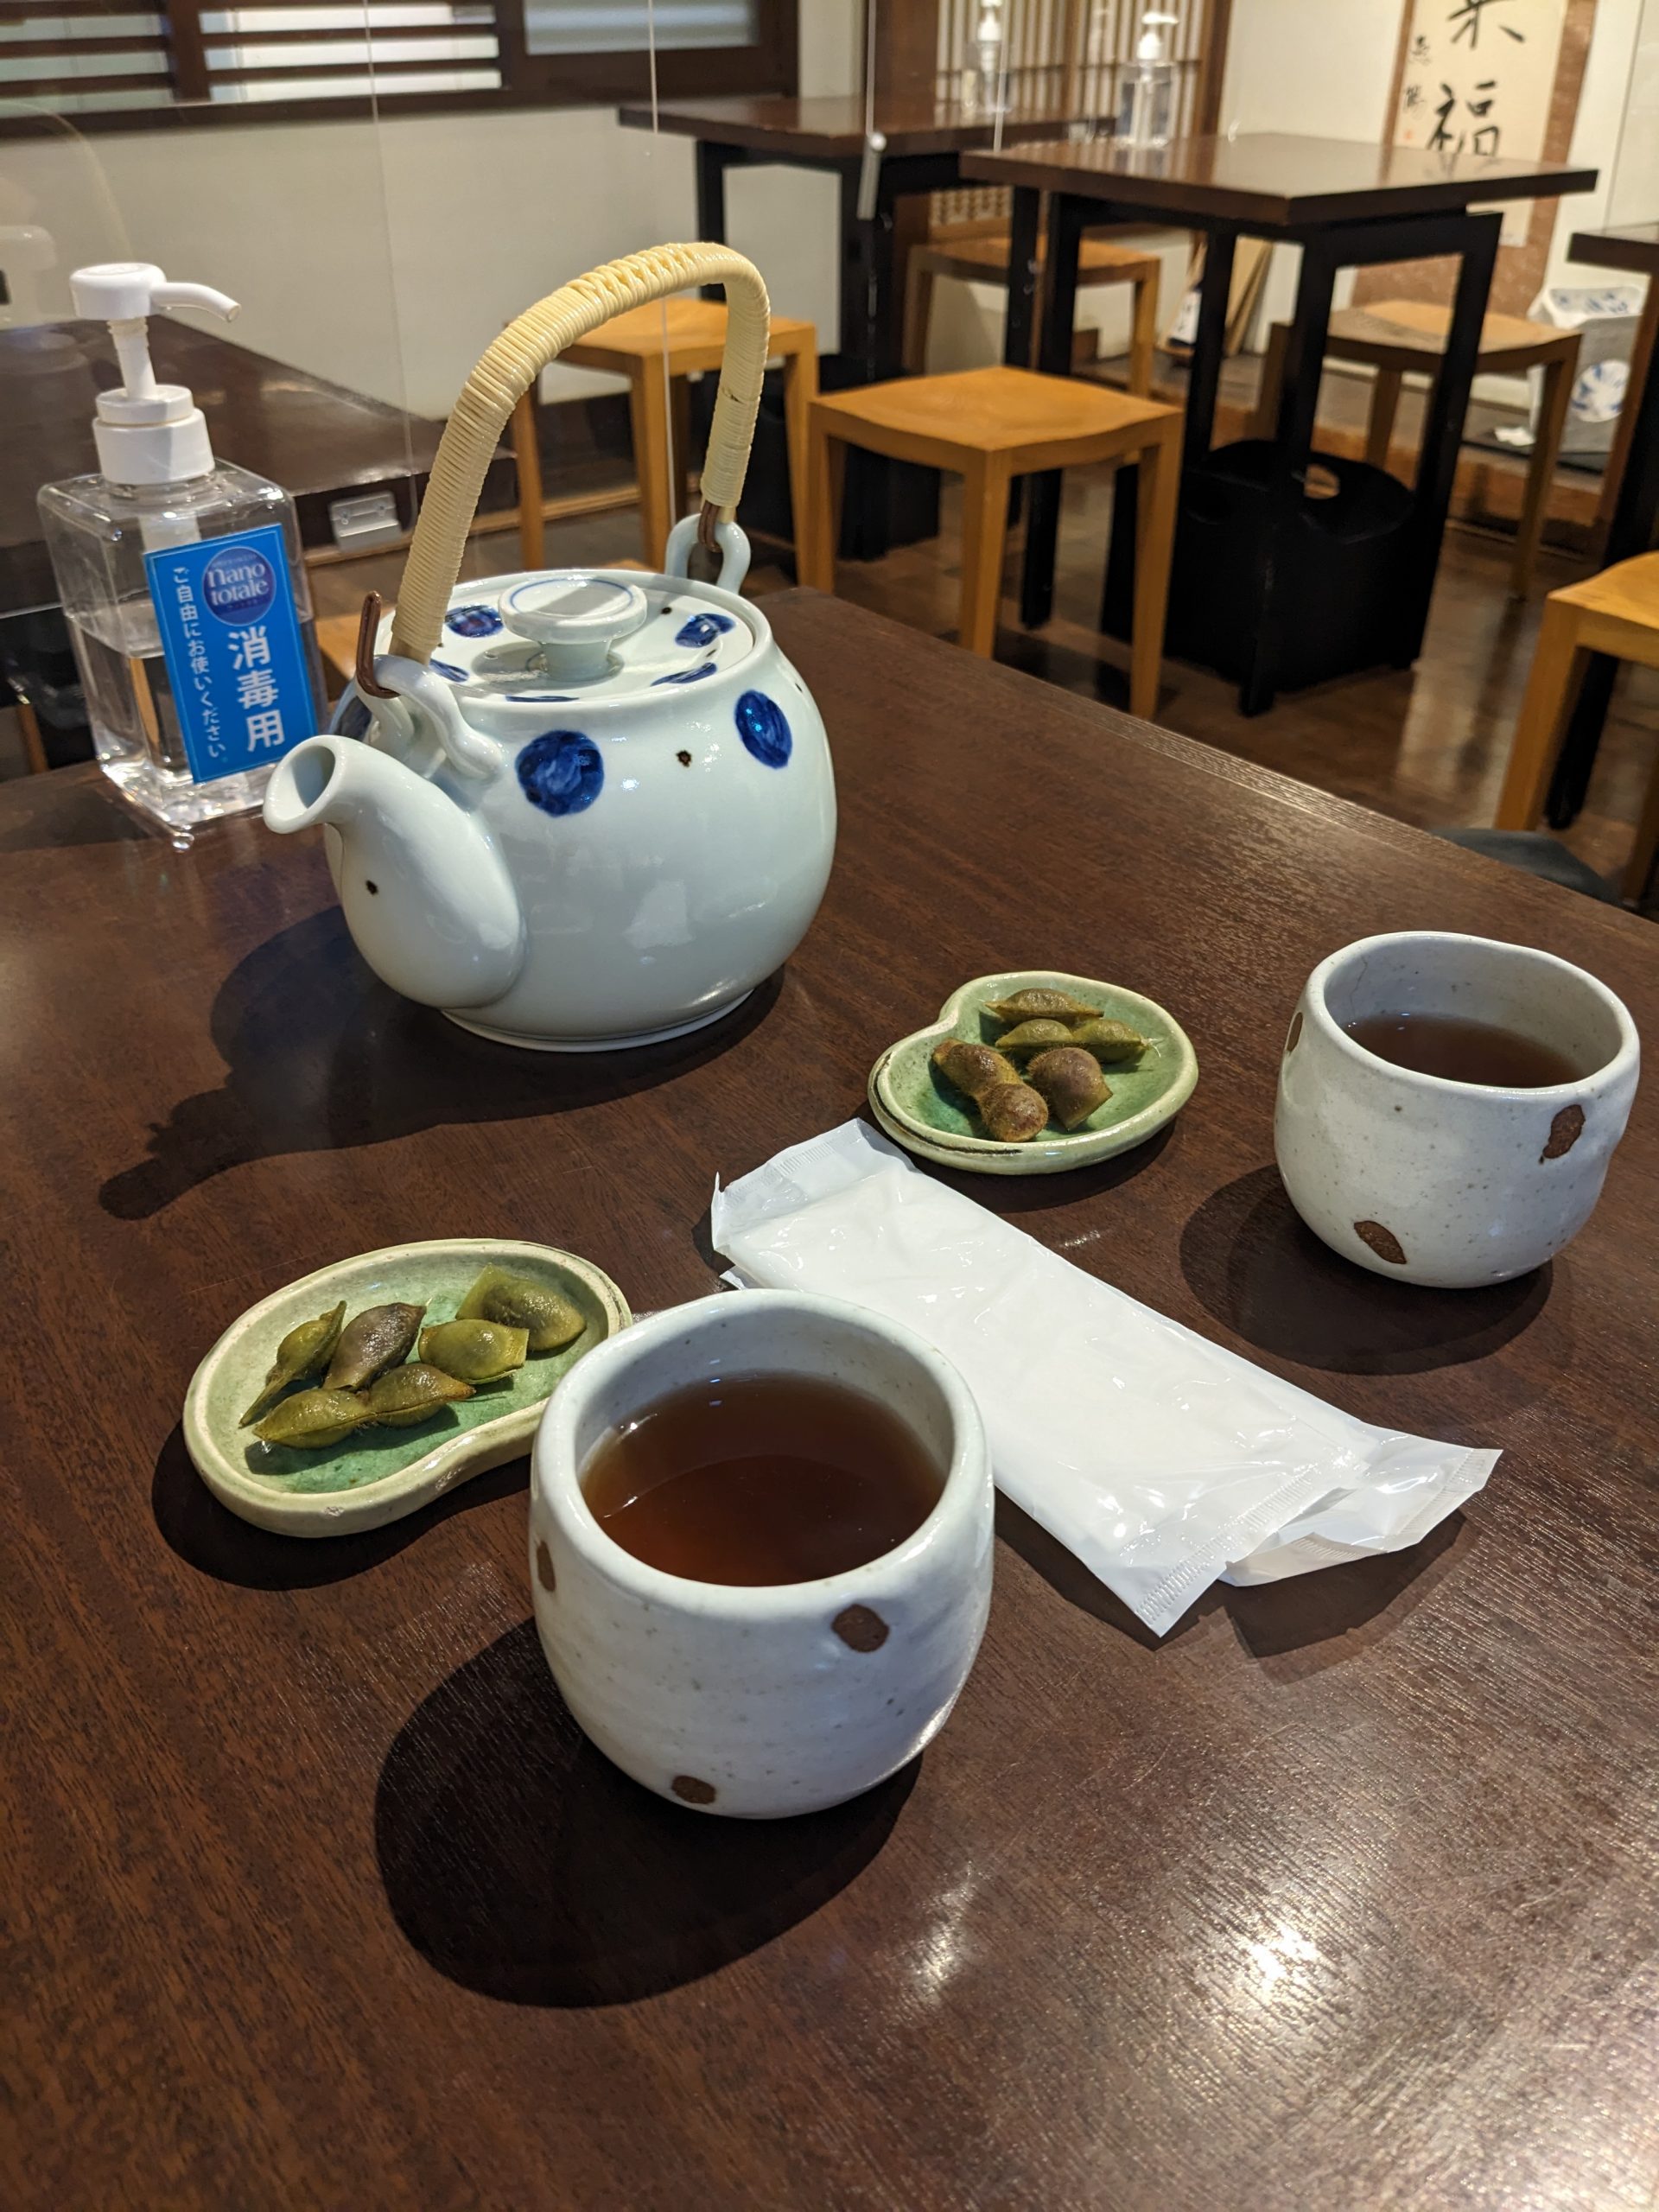 Two white tea cups filled with tea sit across from each other. Two small green dishes filled with beans are next to the cups and a teapot.